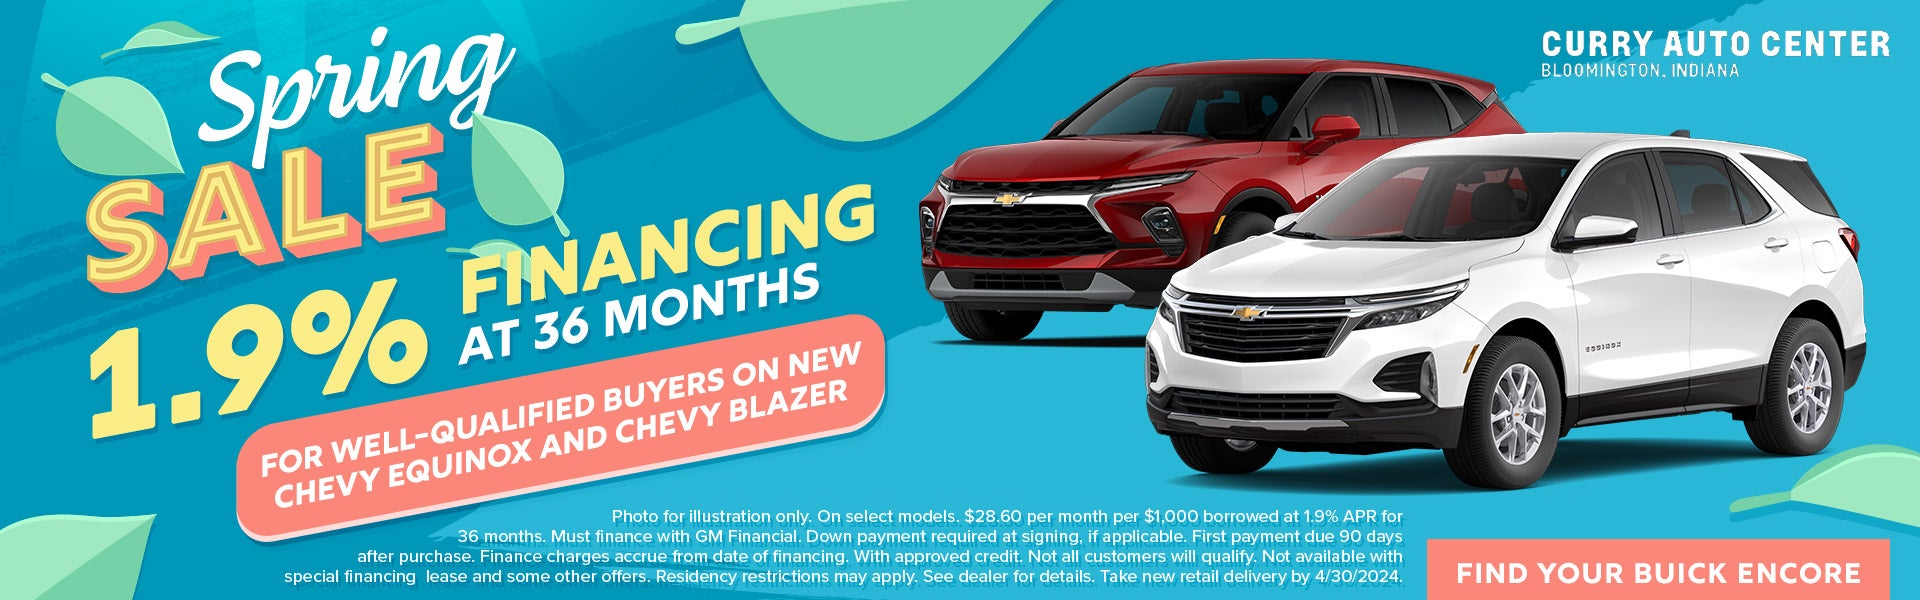 New Chevy SUVs | Curry Auto Center | Bloomington, IN